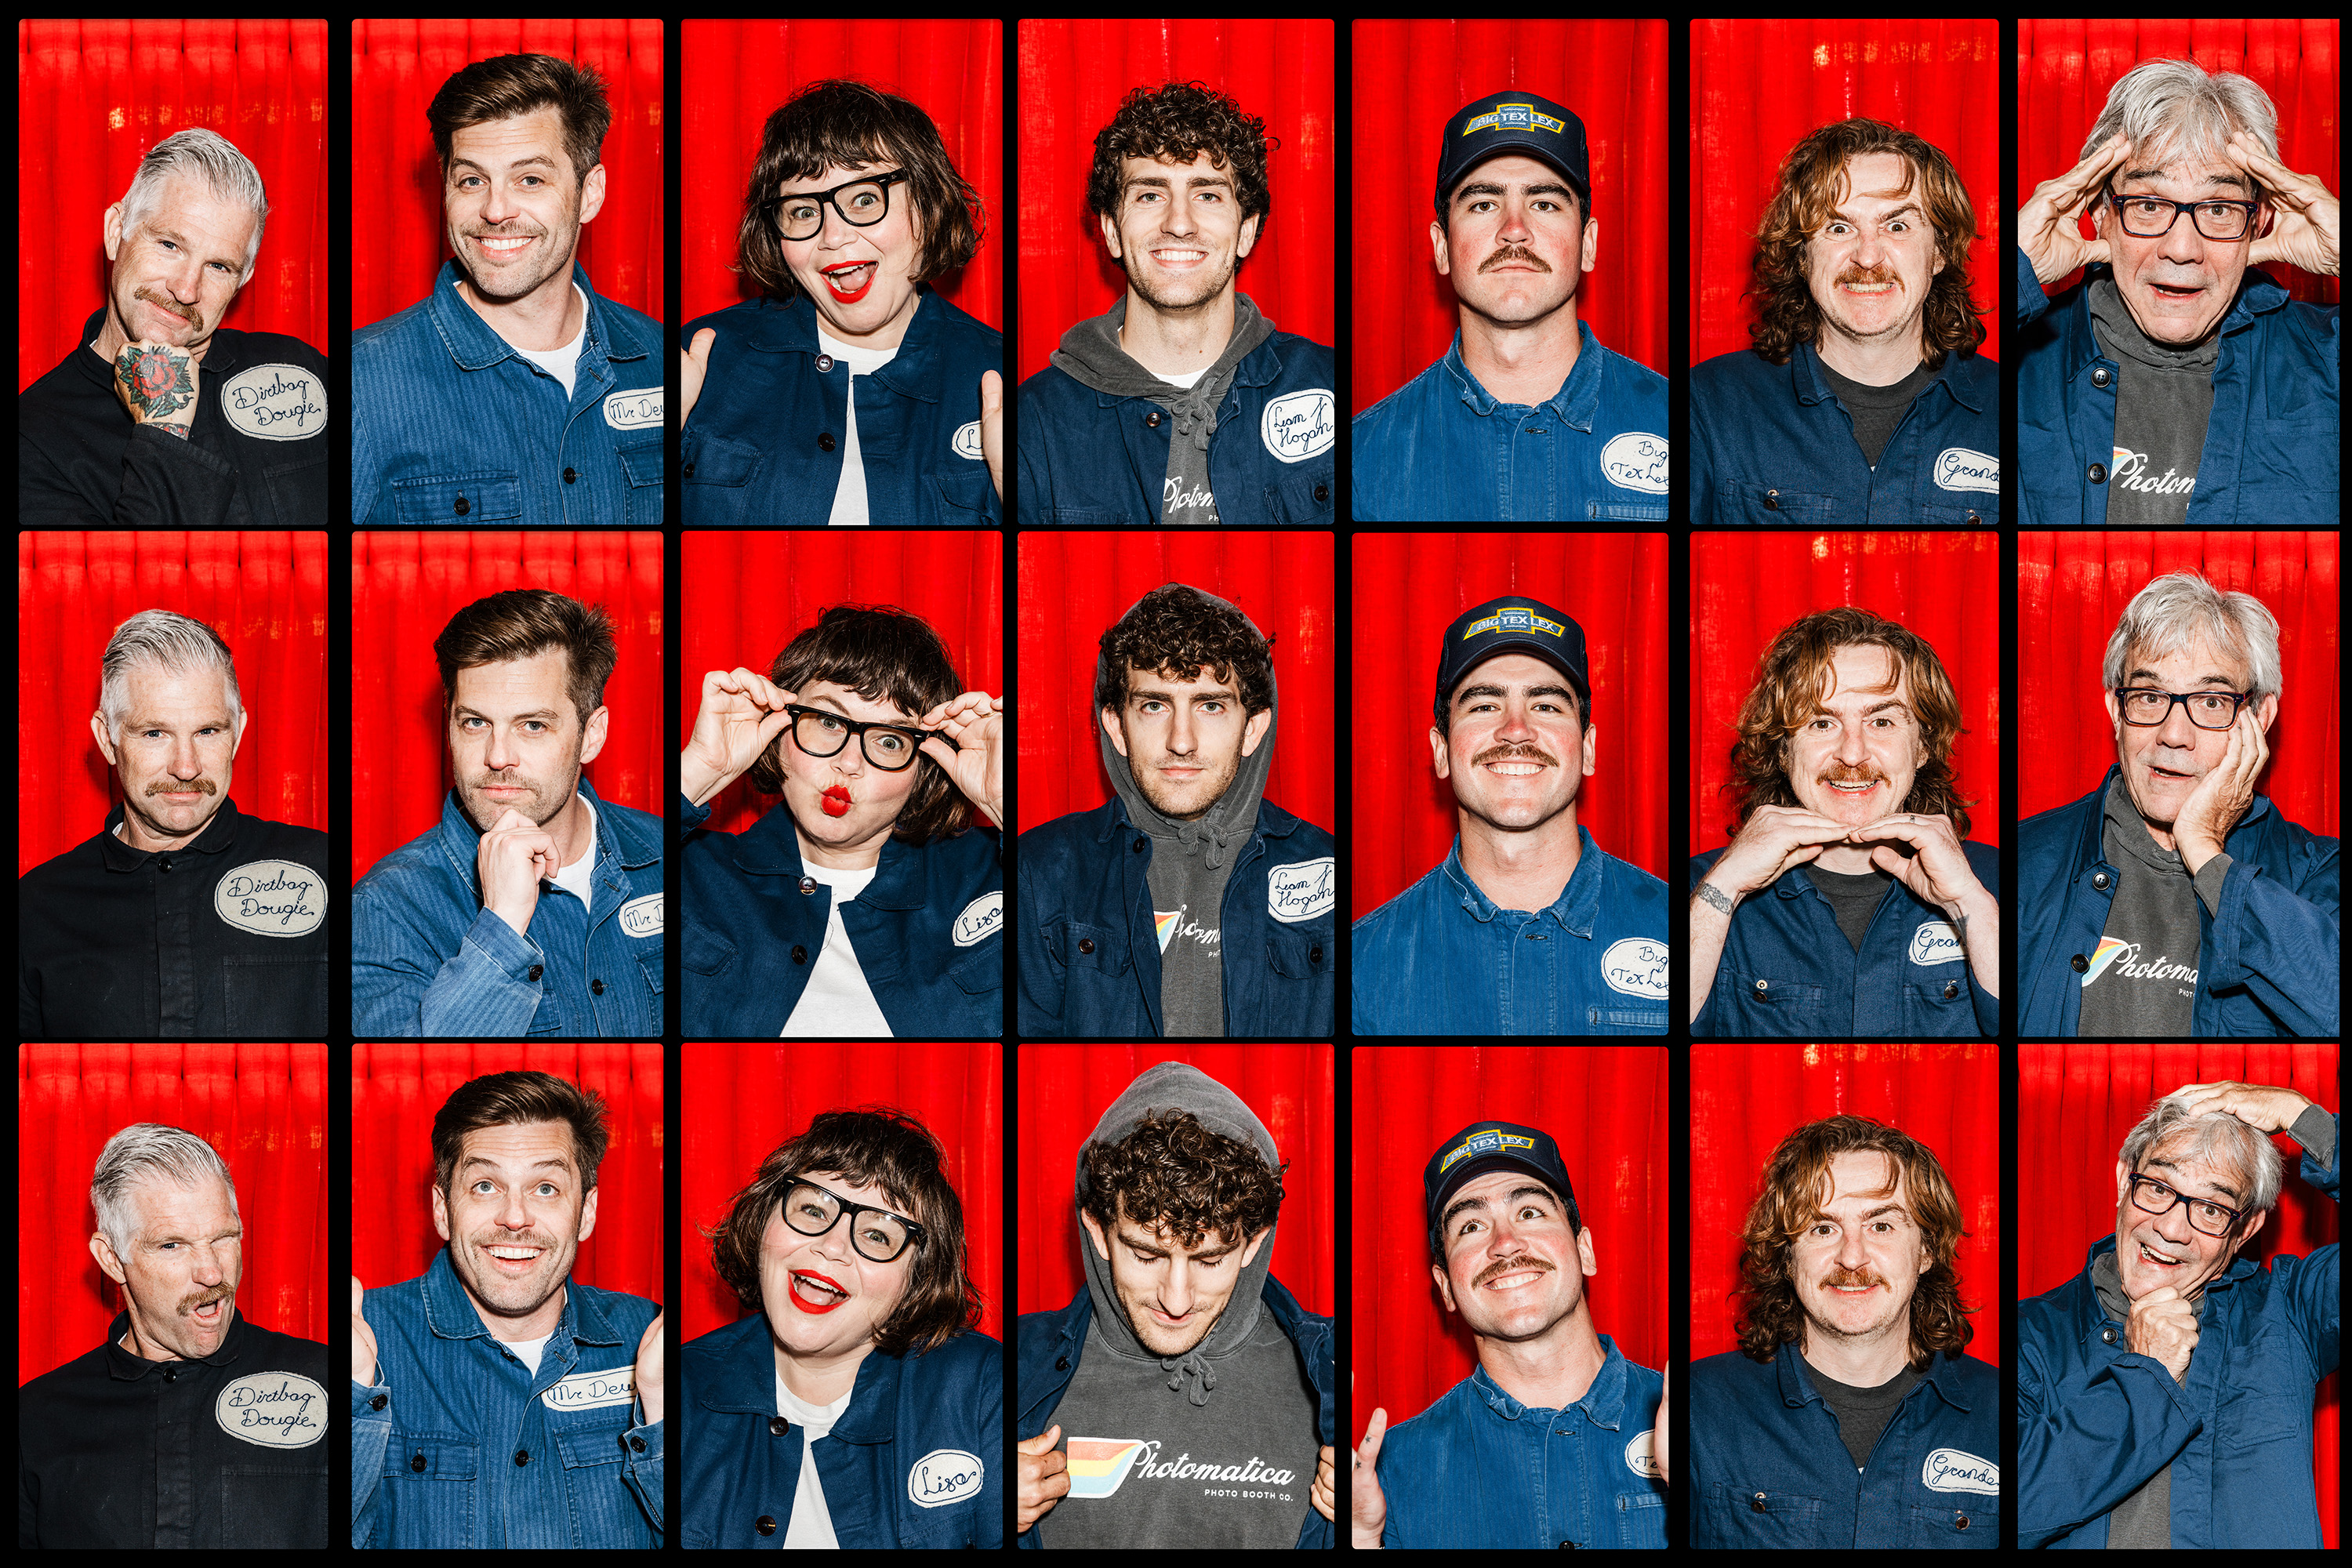 The image is a collage of people against a red curtain backdrop, each person making different facial expressions and gestures. Most wear blue shirts with name tags.